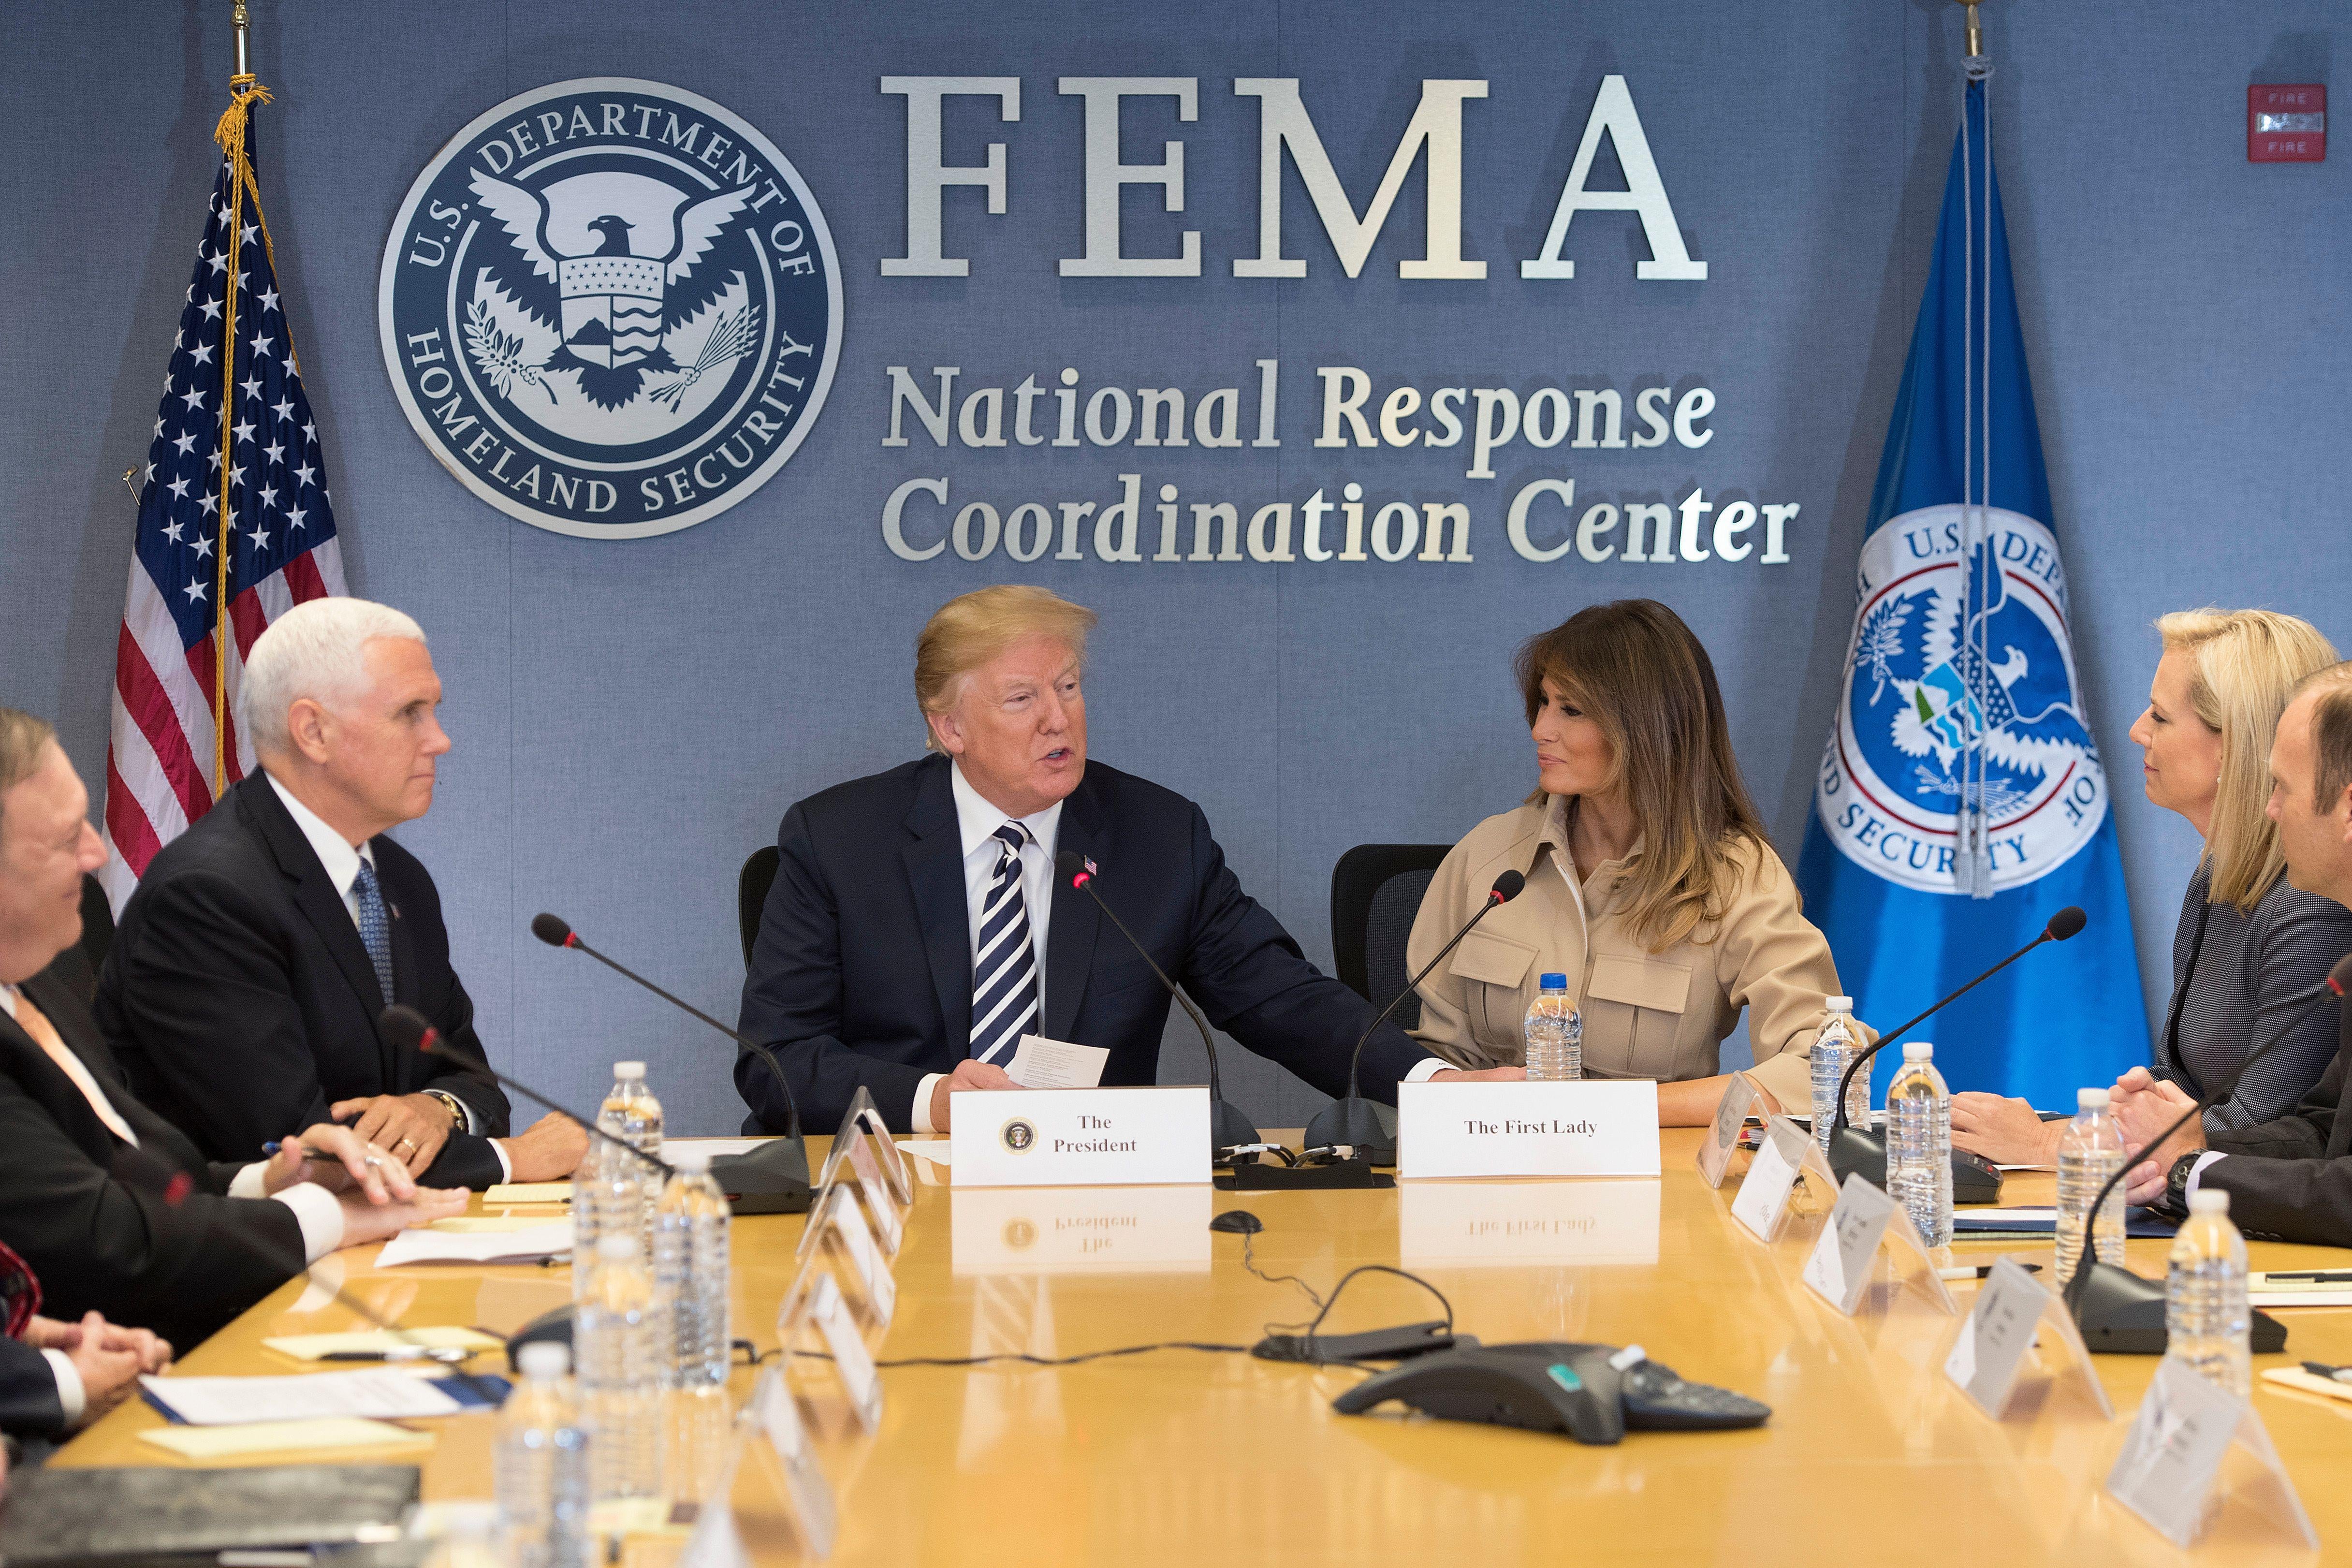 President Donald Trump, Vice President Mike Pence, and First Lady Melania Trump visit the Federal Emergency Management Agency Headquarters and attend a 2018 Hurricane Briefing in Washington, D.C. on June 6, 2018.